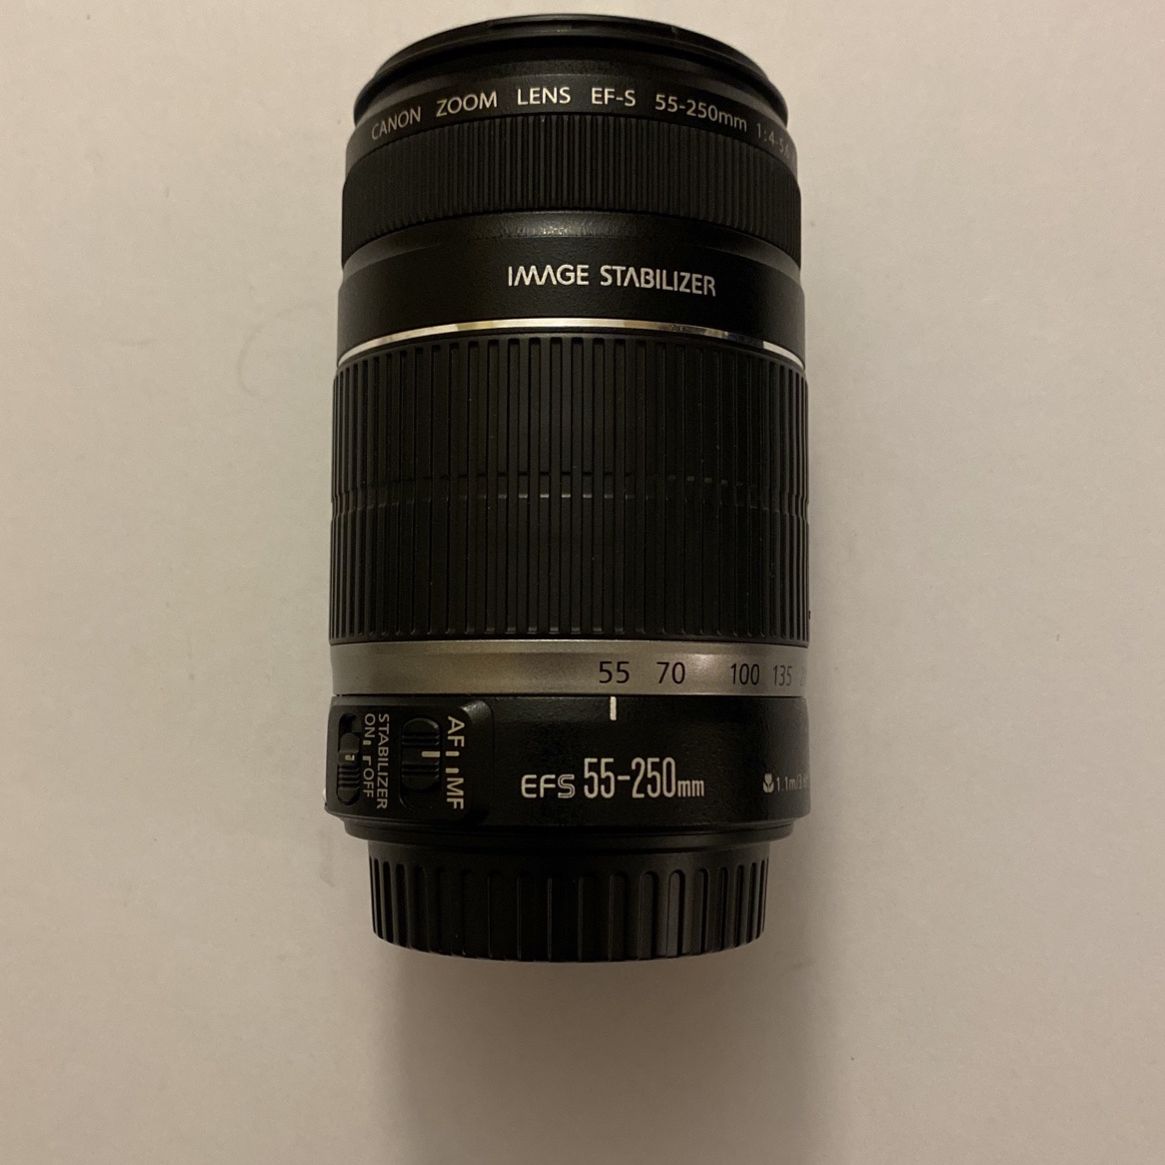 Canon EF-S 55-250mm f/4-5.6 IS Lens